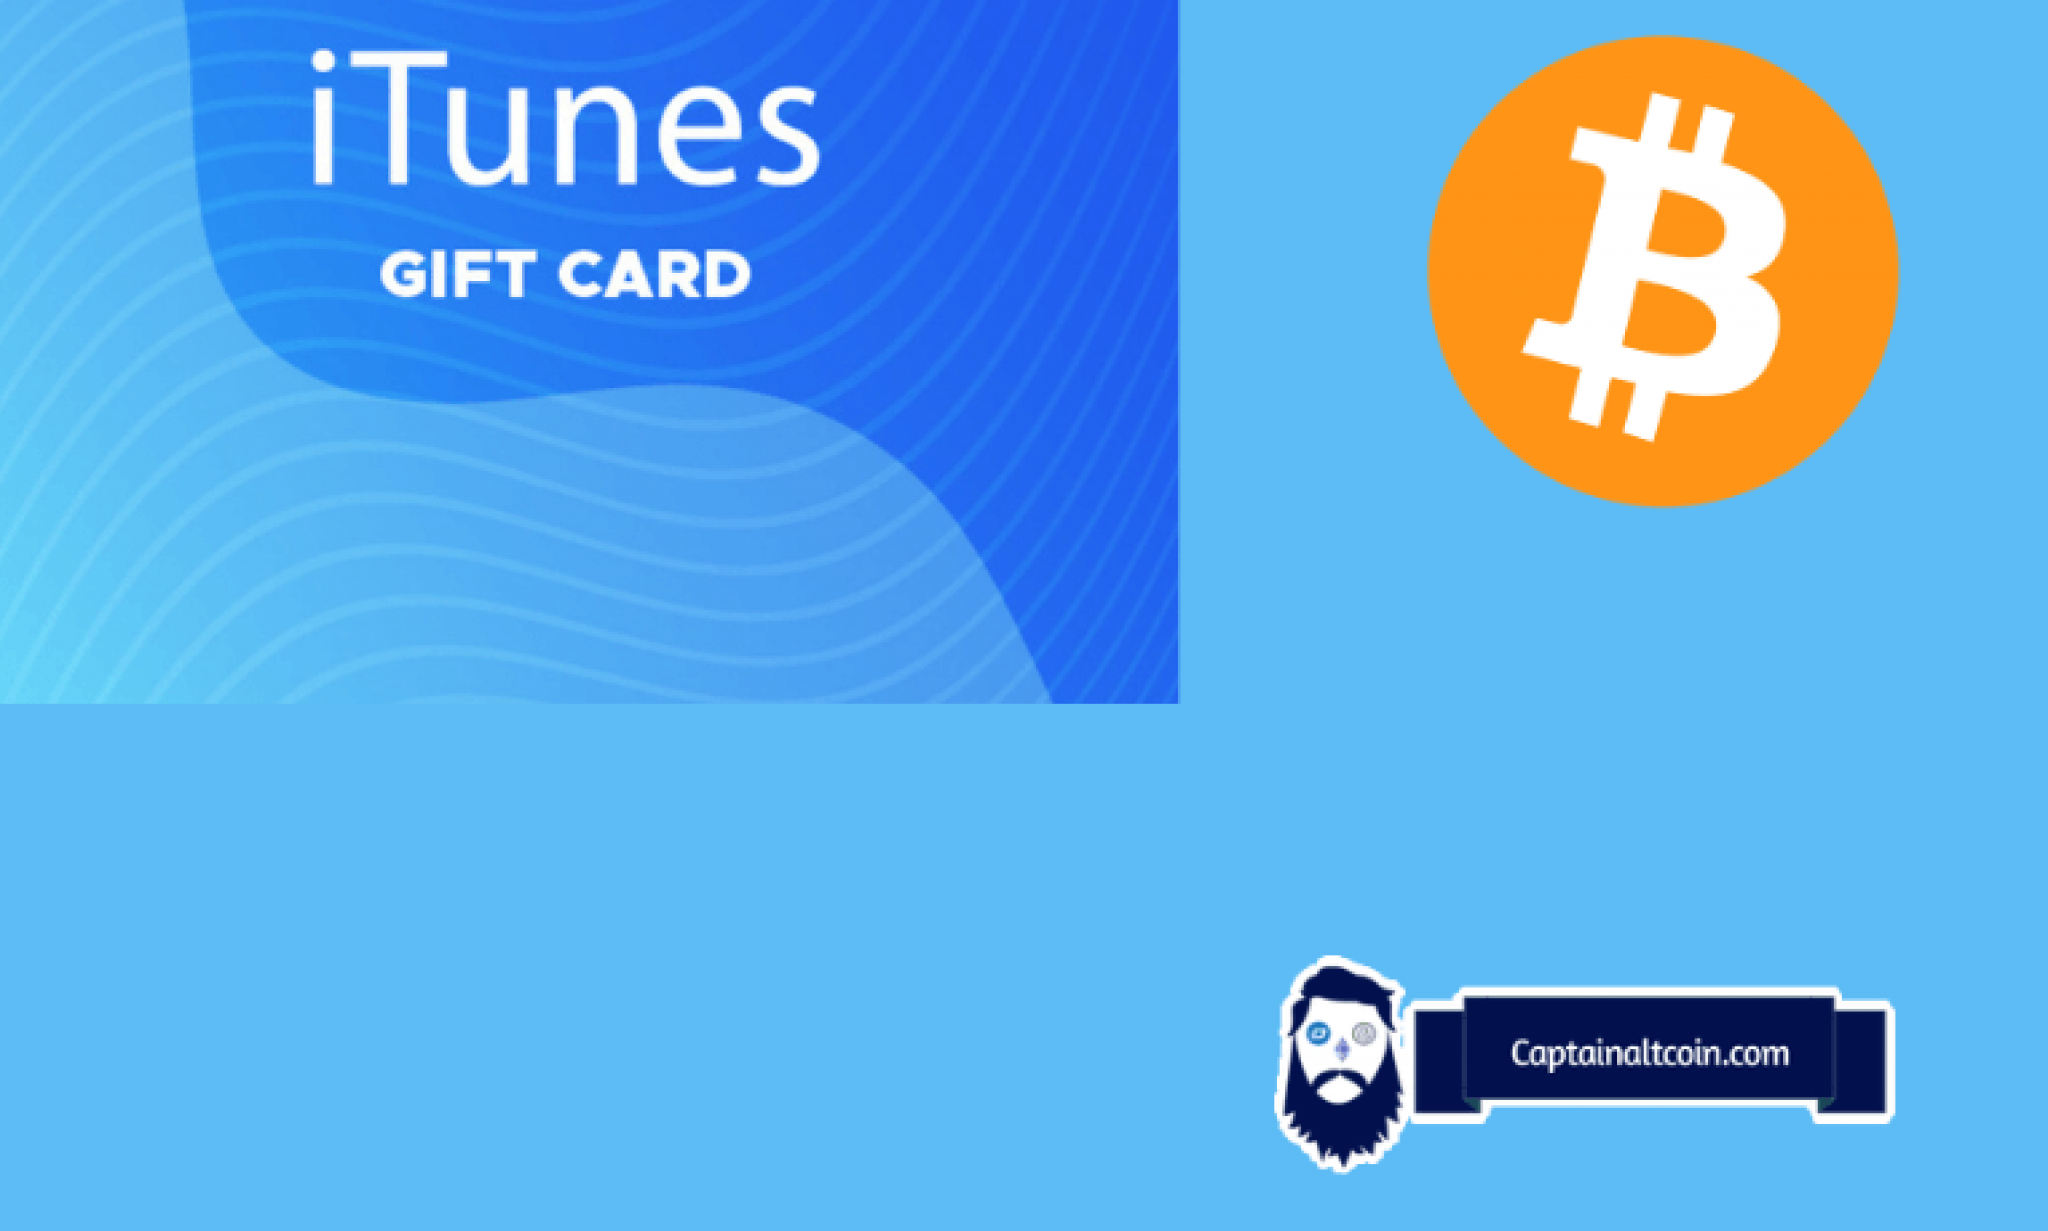 buy bitcoin with itunes gift card uk